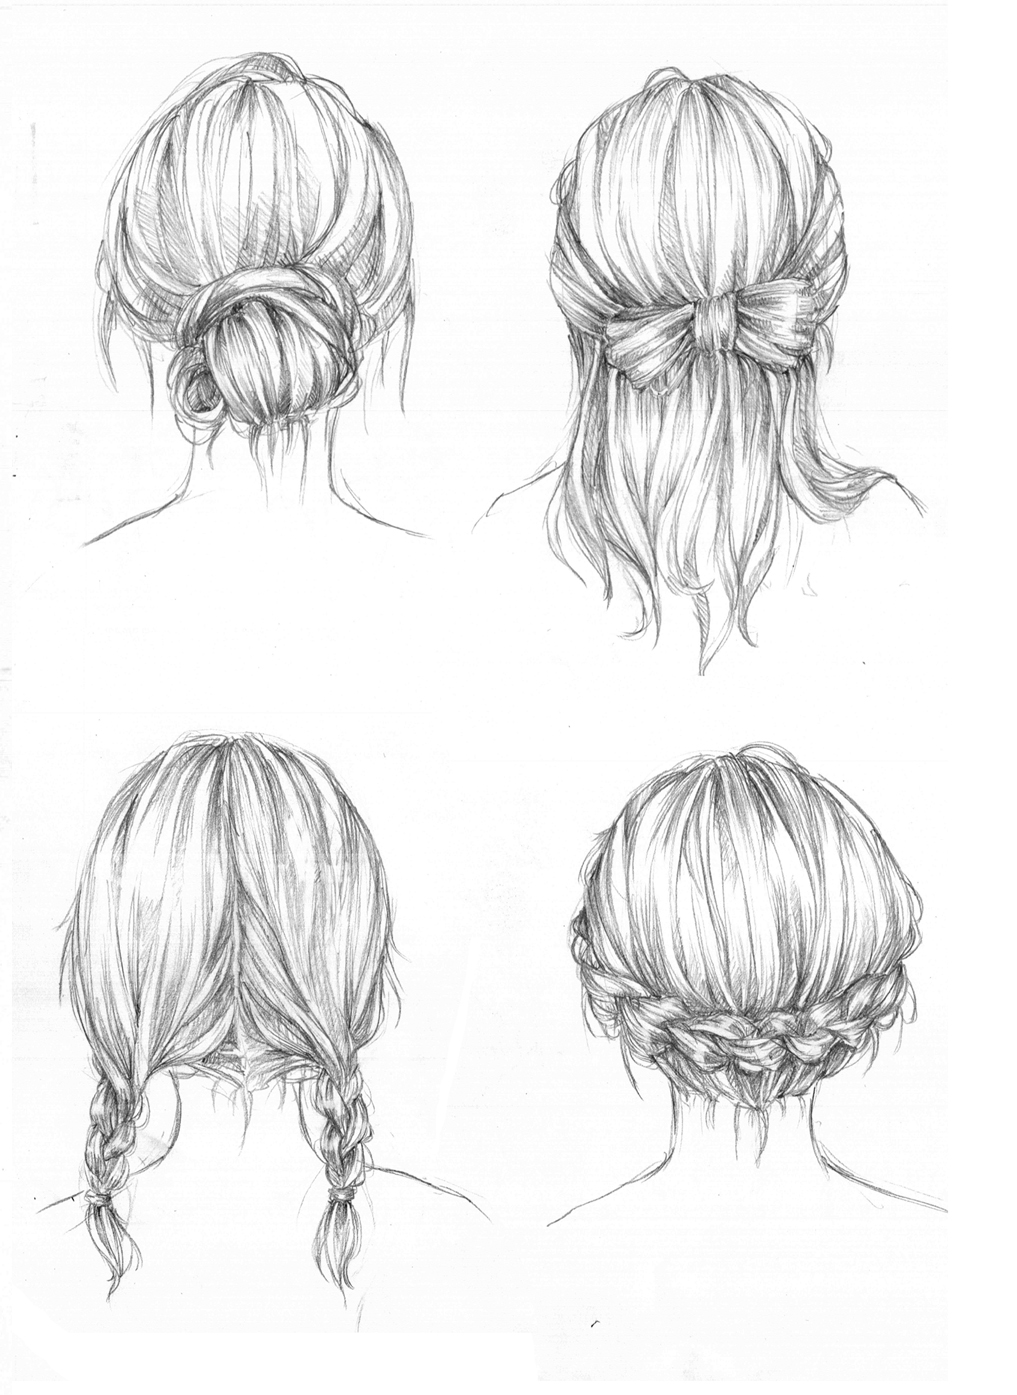 Hairstyles by Capilair on DeviantArt